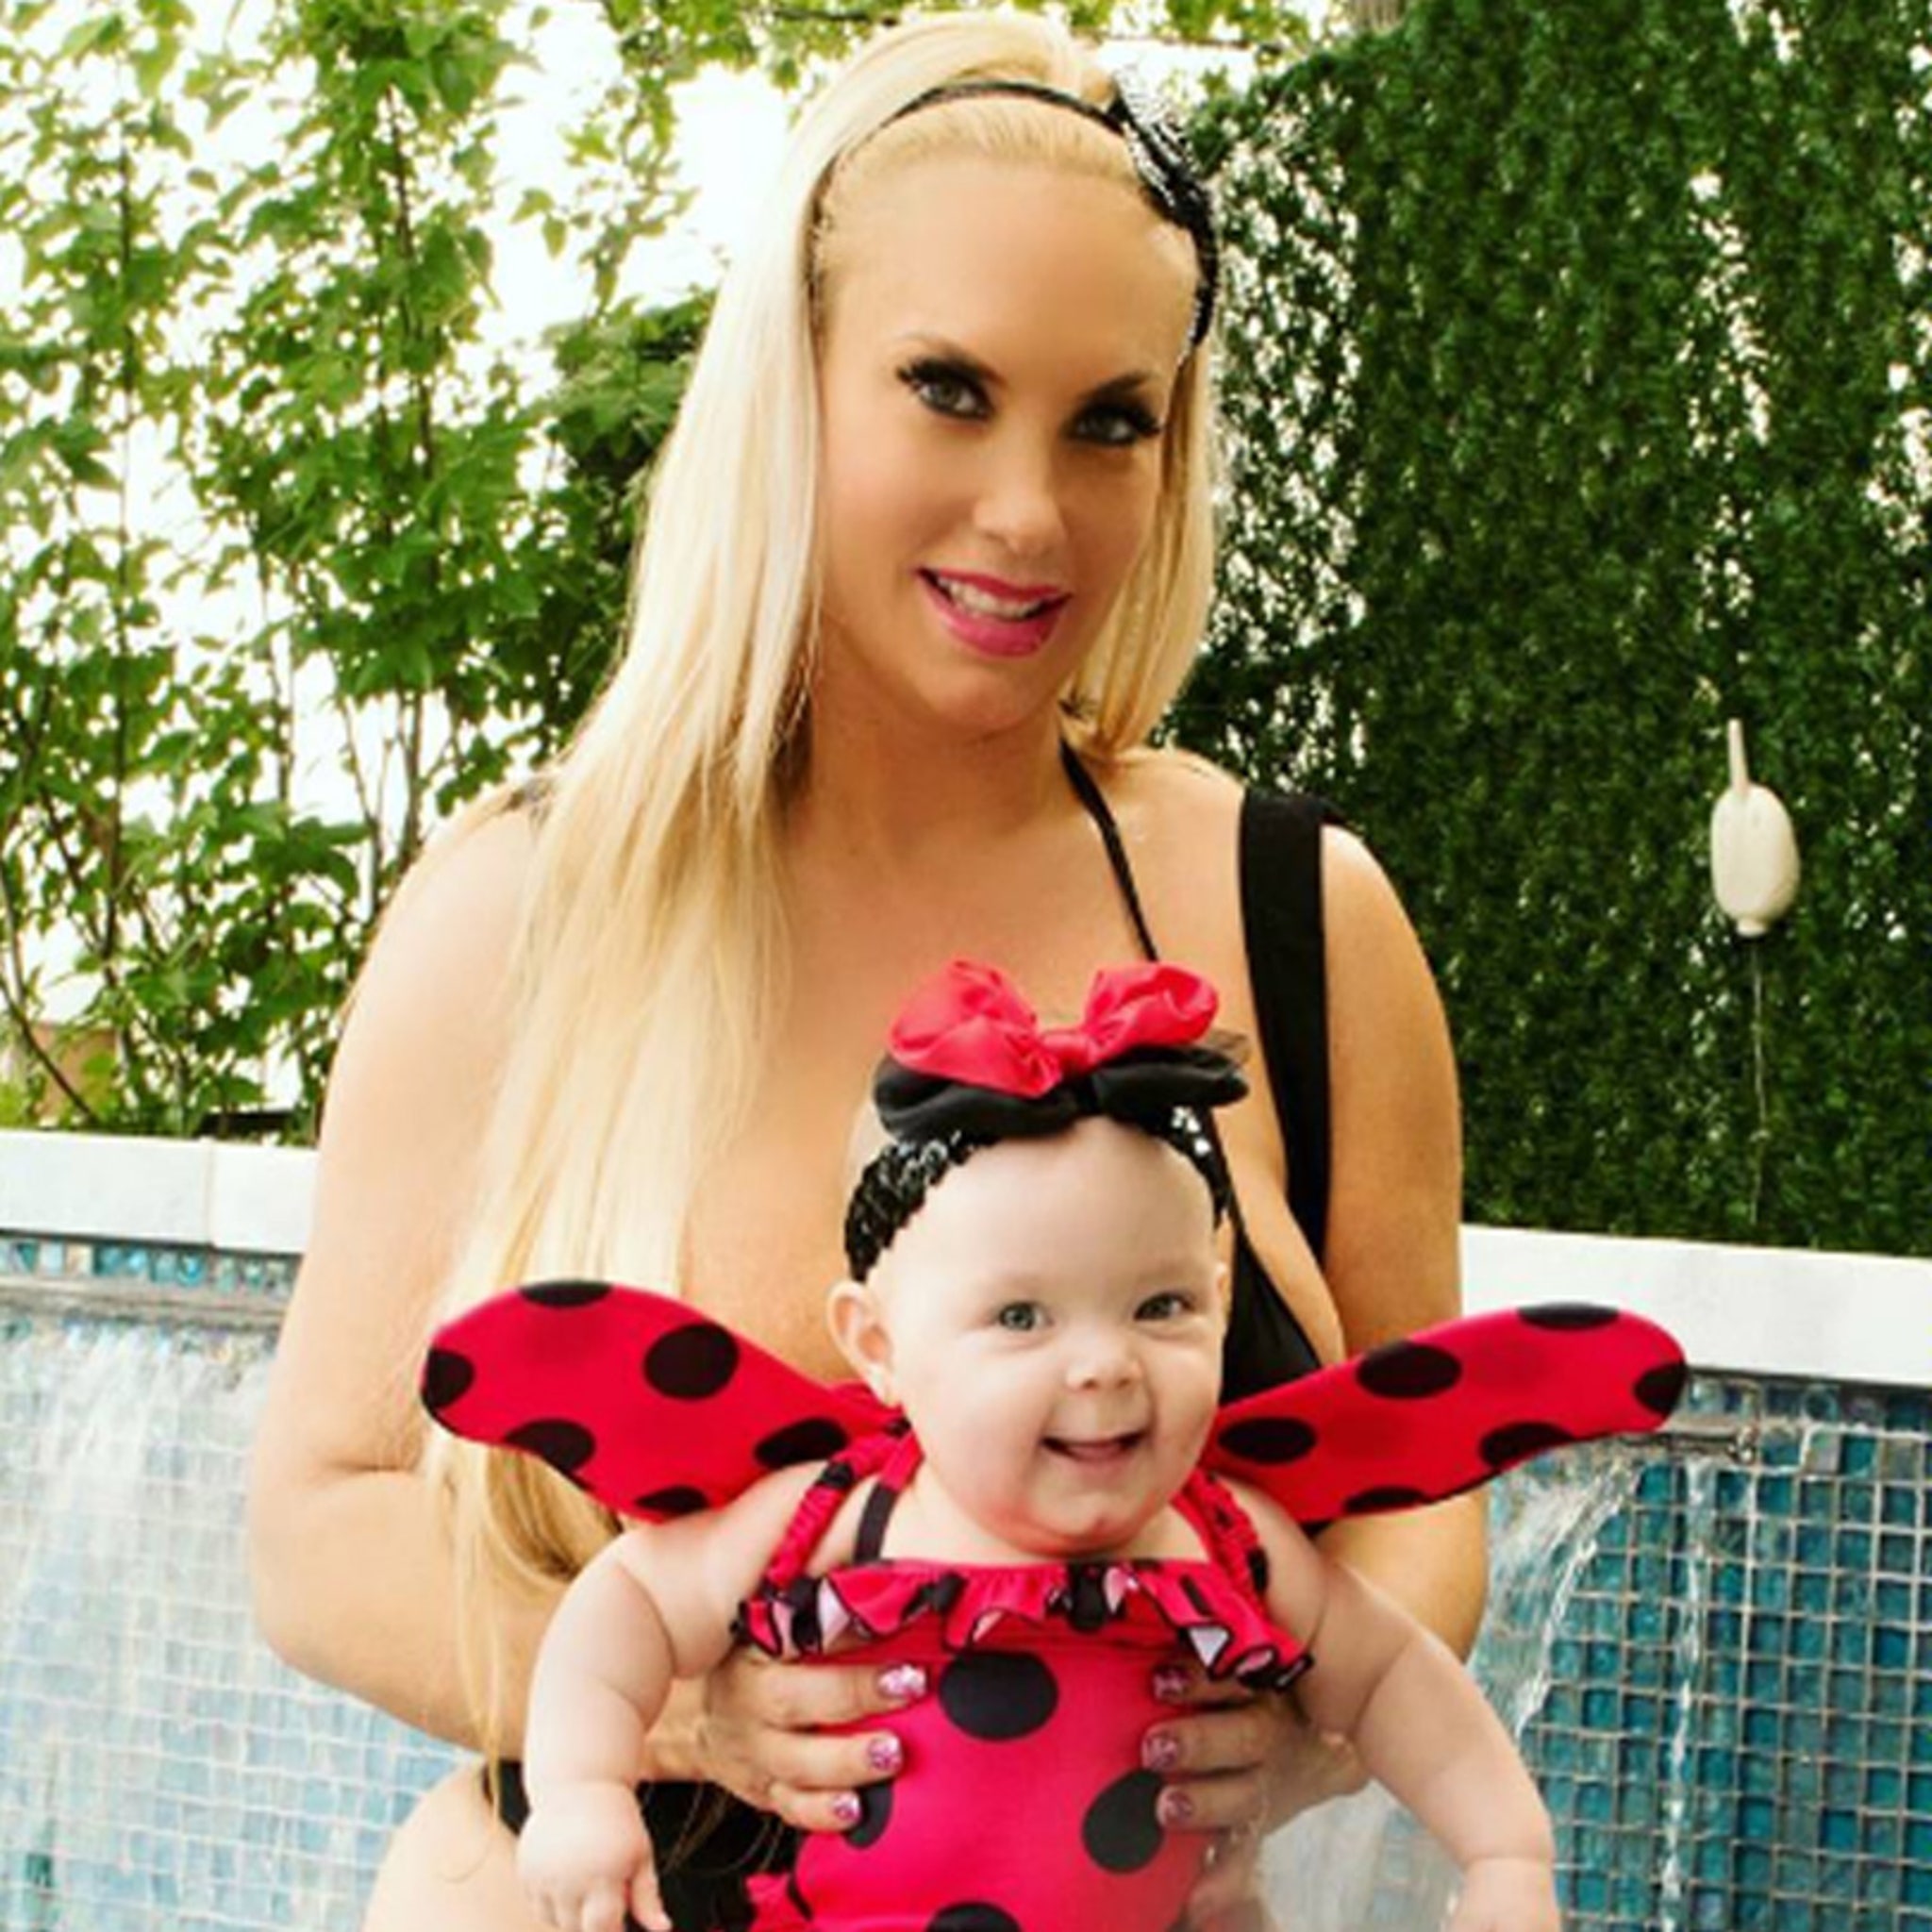 Coco Austin Says Baby Chanel Nicole's Instagram Presence Has Restored Her  Faith in Humanity